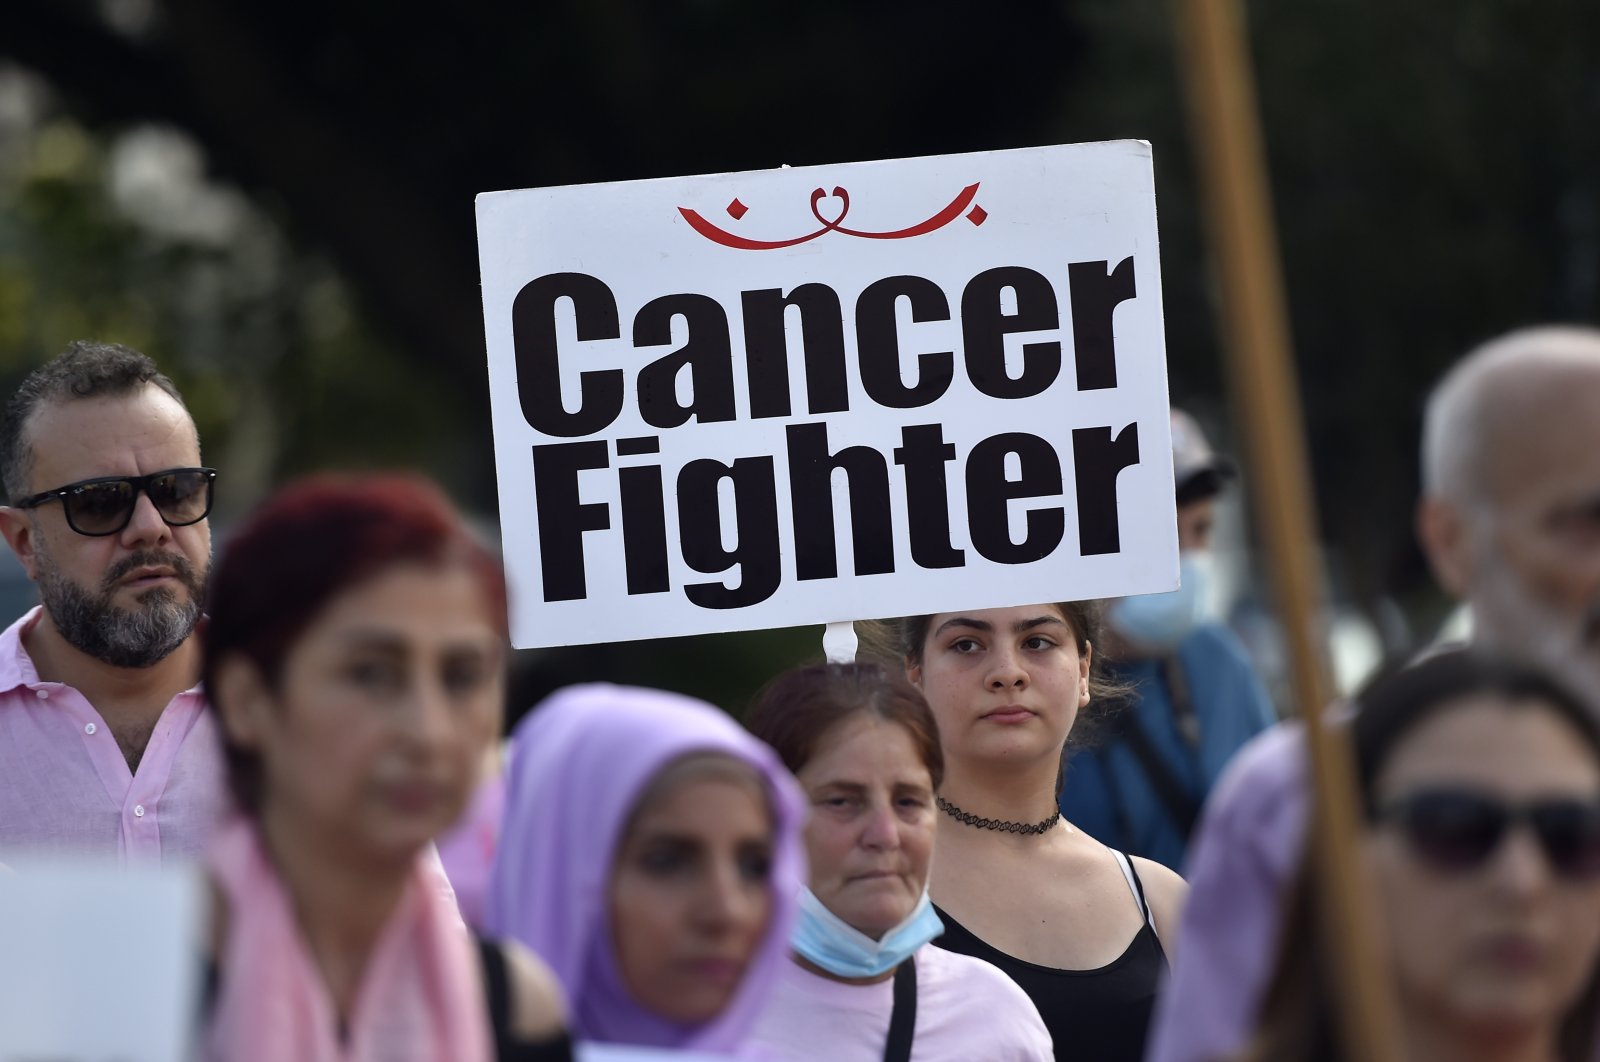 A Lebanese activist carries a placard &quot;Cancer Fighter&quot; during a march of solidarity with women diagnosed with breast cancer, in Beirut, Lebanon, Oct. 2, 2022. (EPA Photo)